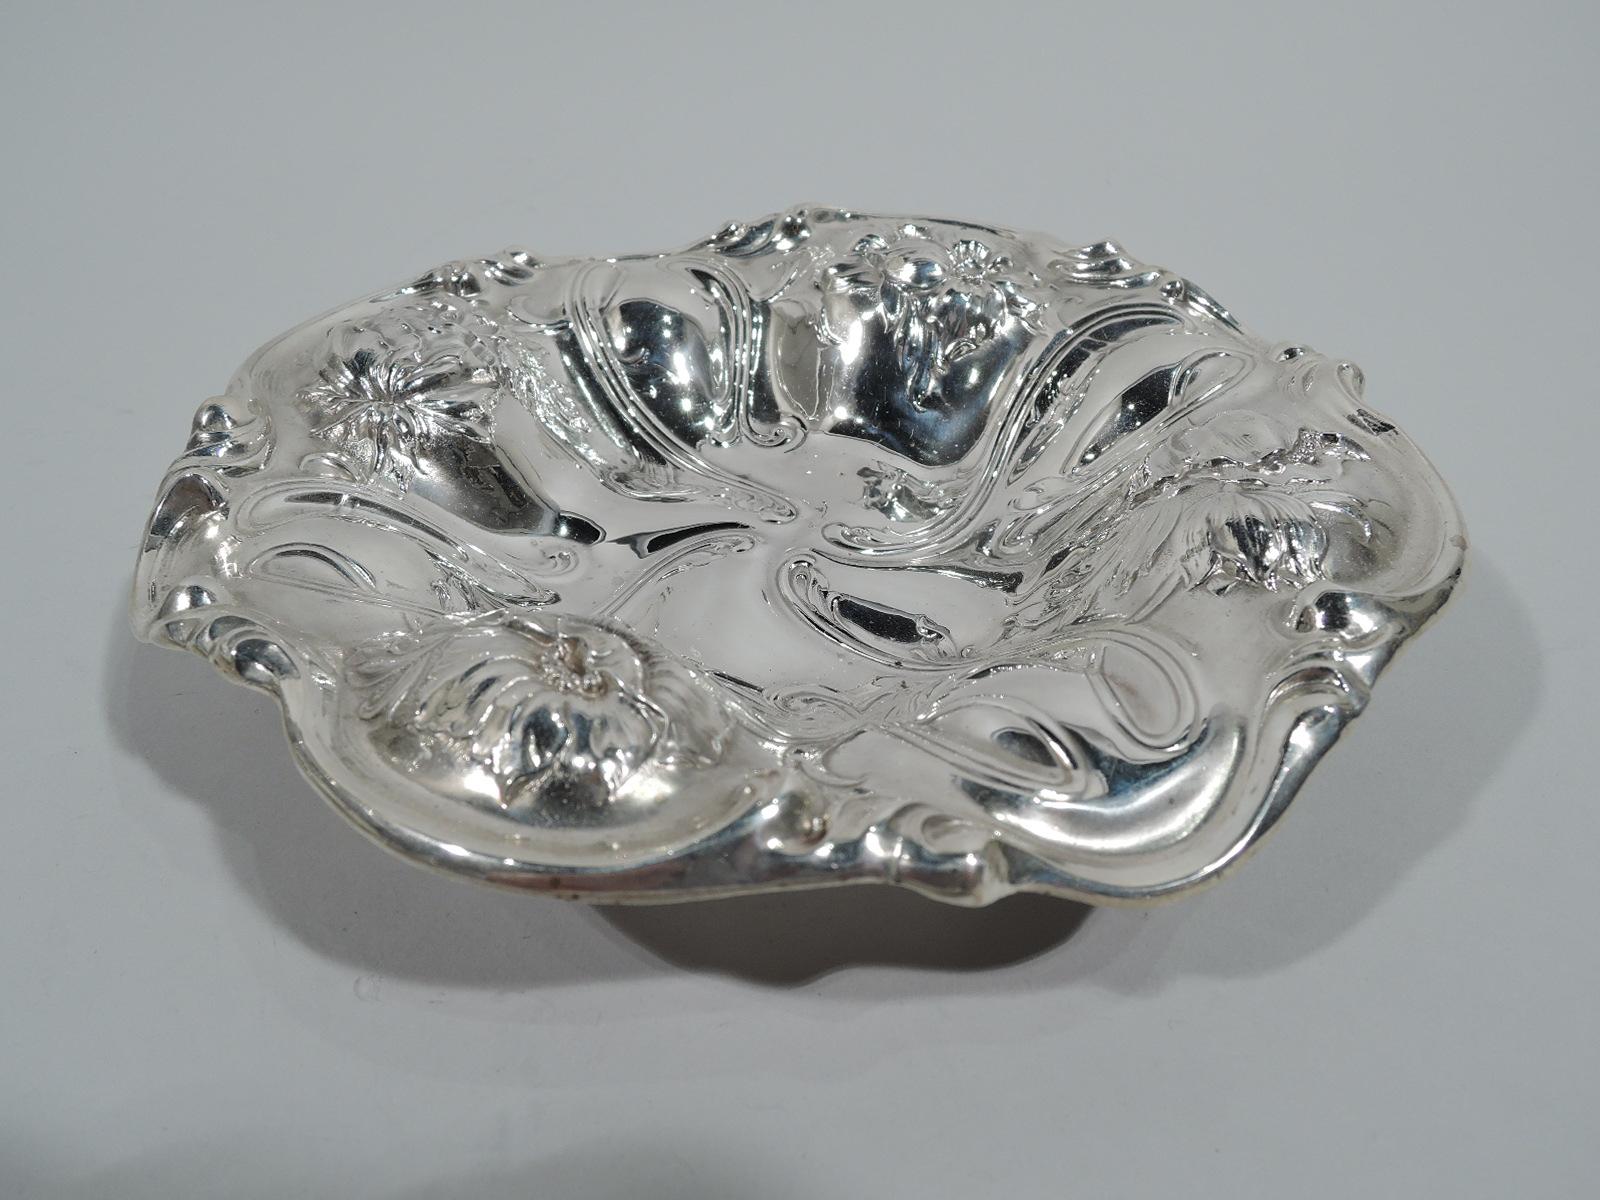 Turn-of-the-century Art Nouveau sterling silver bowl. Made by Woodside in New York. Round with shaped well and wavy scrolled rim. Sides lobed with chased flowers alternating with tendril frames flowing into well. Fully marked and numbered 2973.